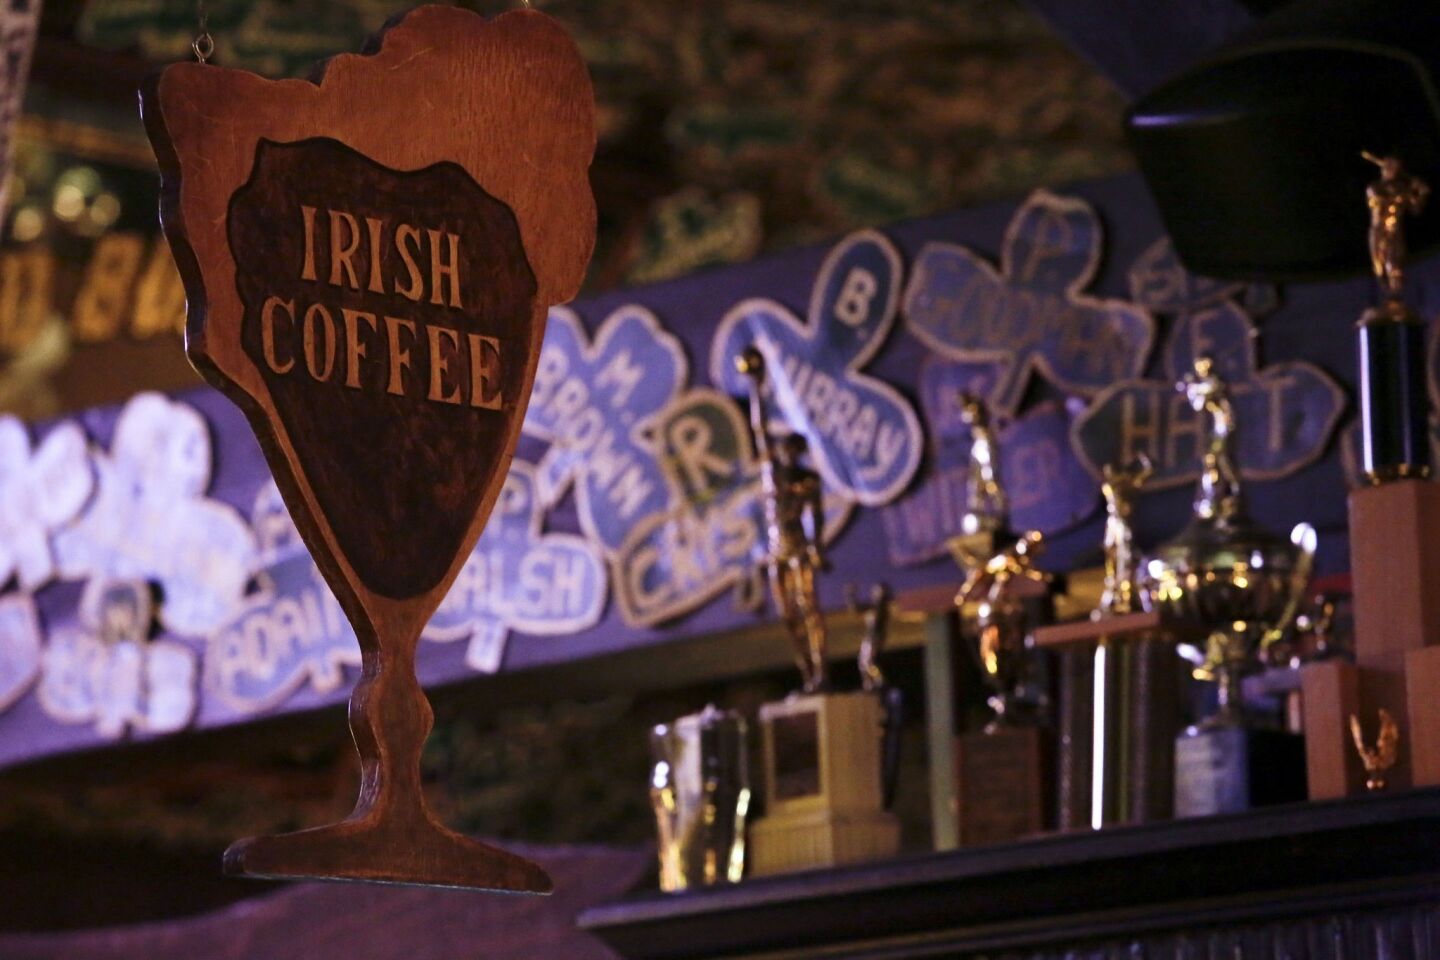 The restaurant and bar was known for its Irish coffee.